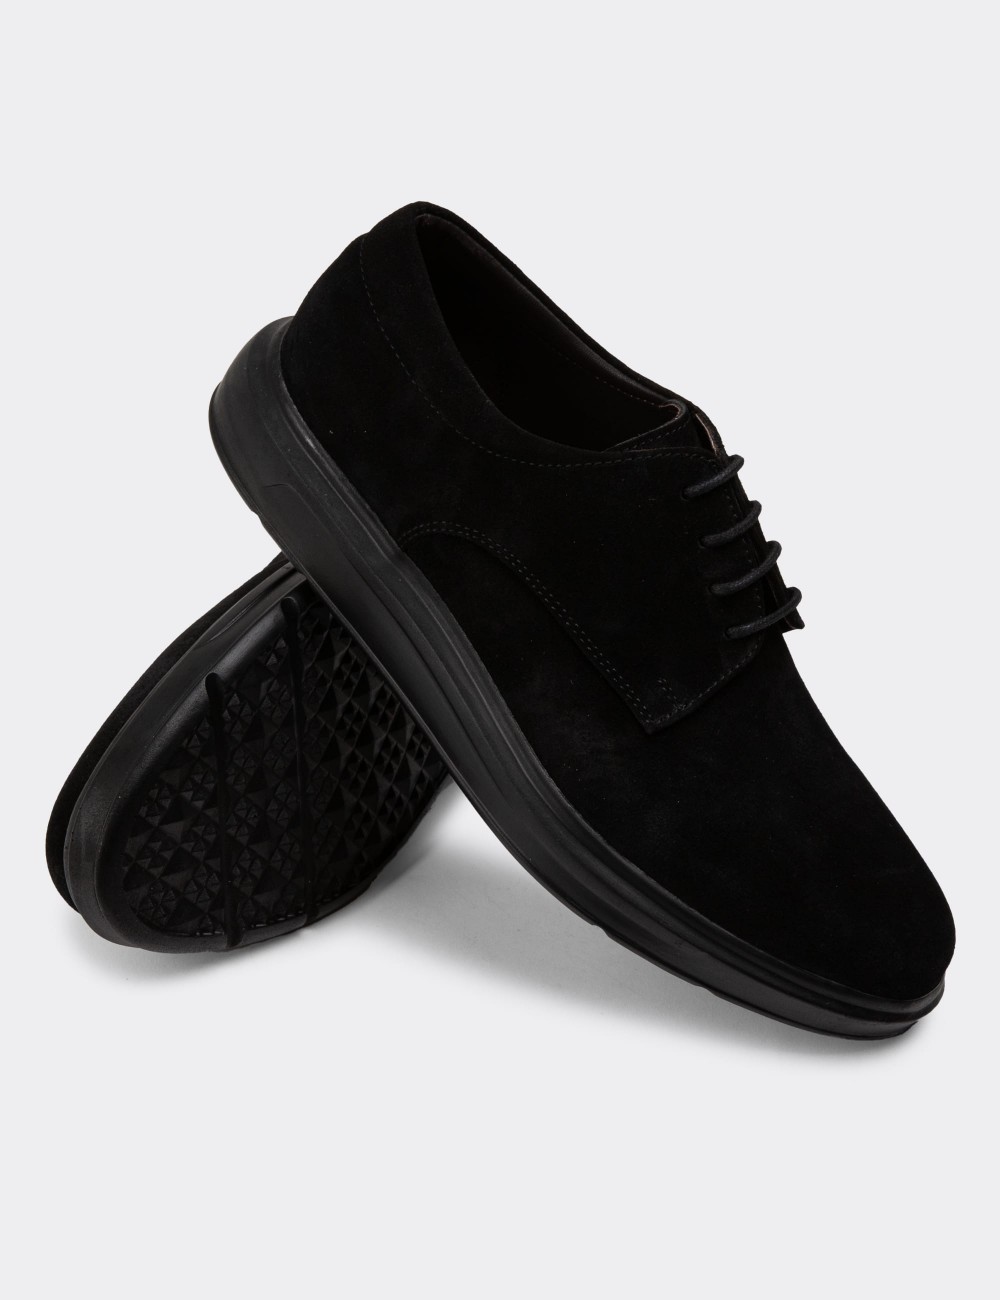 Black Suede Leather Lace-up Shoes - 01934MSYHP01